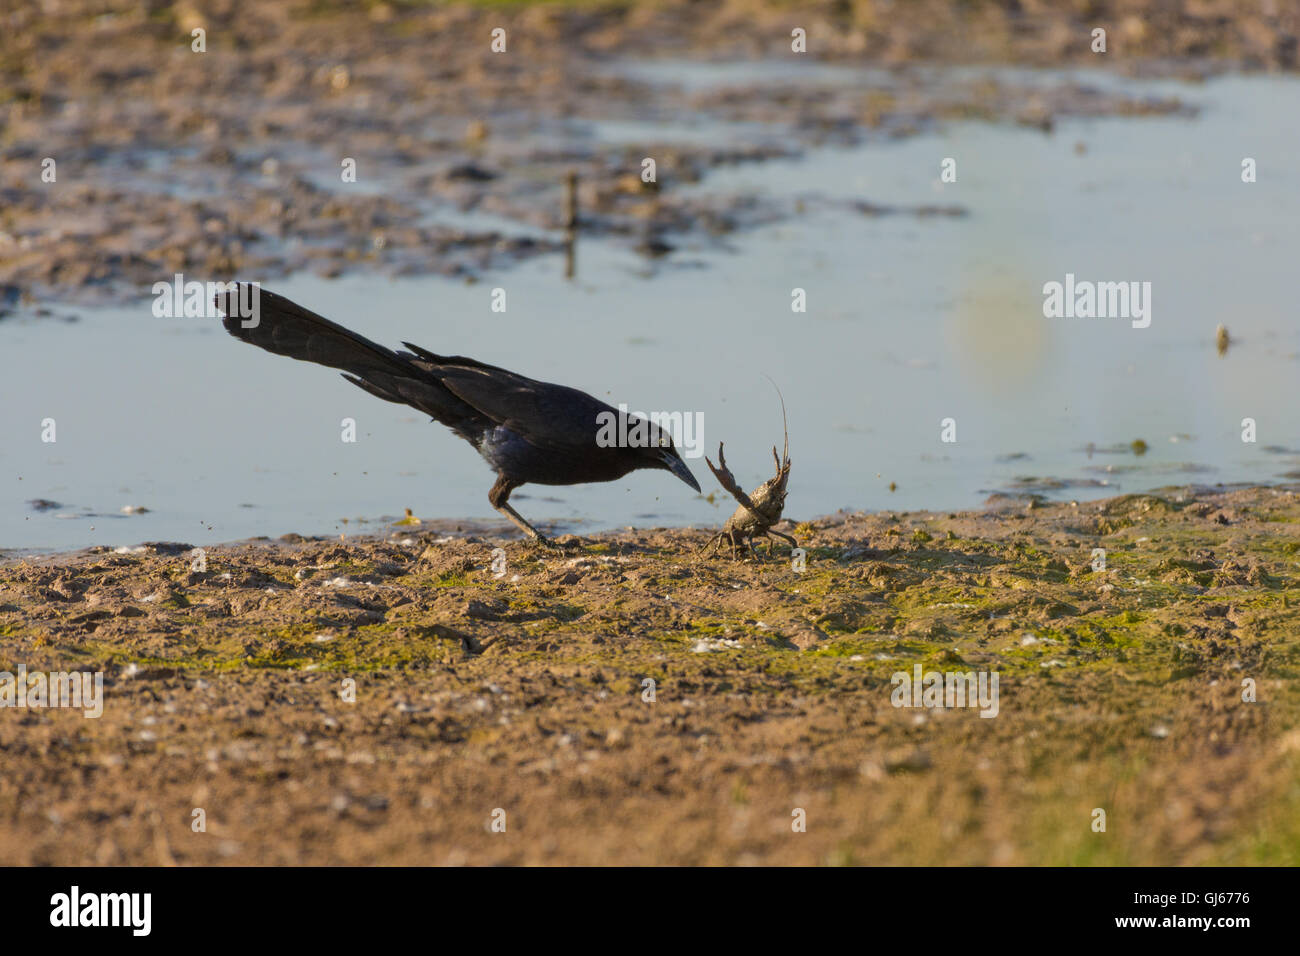 Male Great-tailed Grackle, (Quiscalus mexicanus), preying on a Crayfish.  Bosque del Apache National Wildlife Refuge, New Mexico Stock Photo